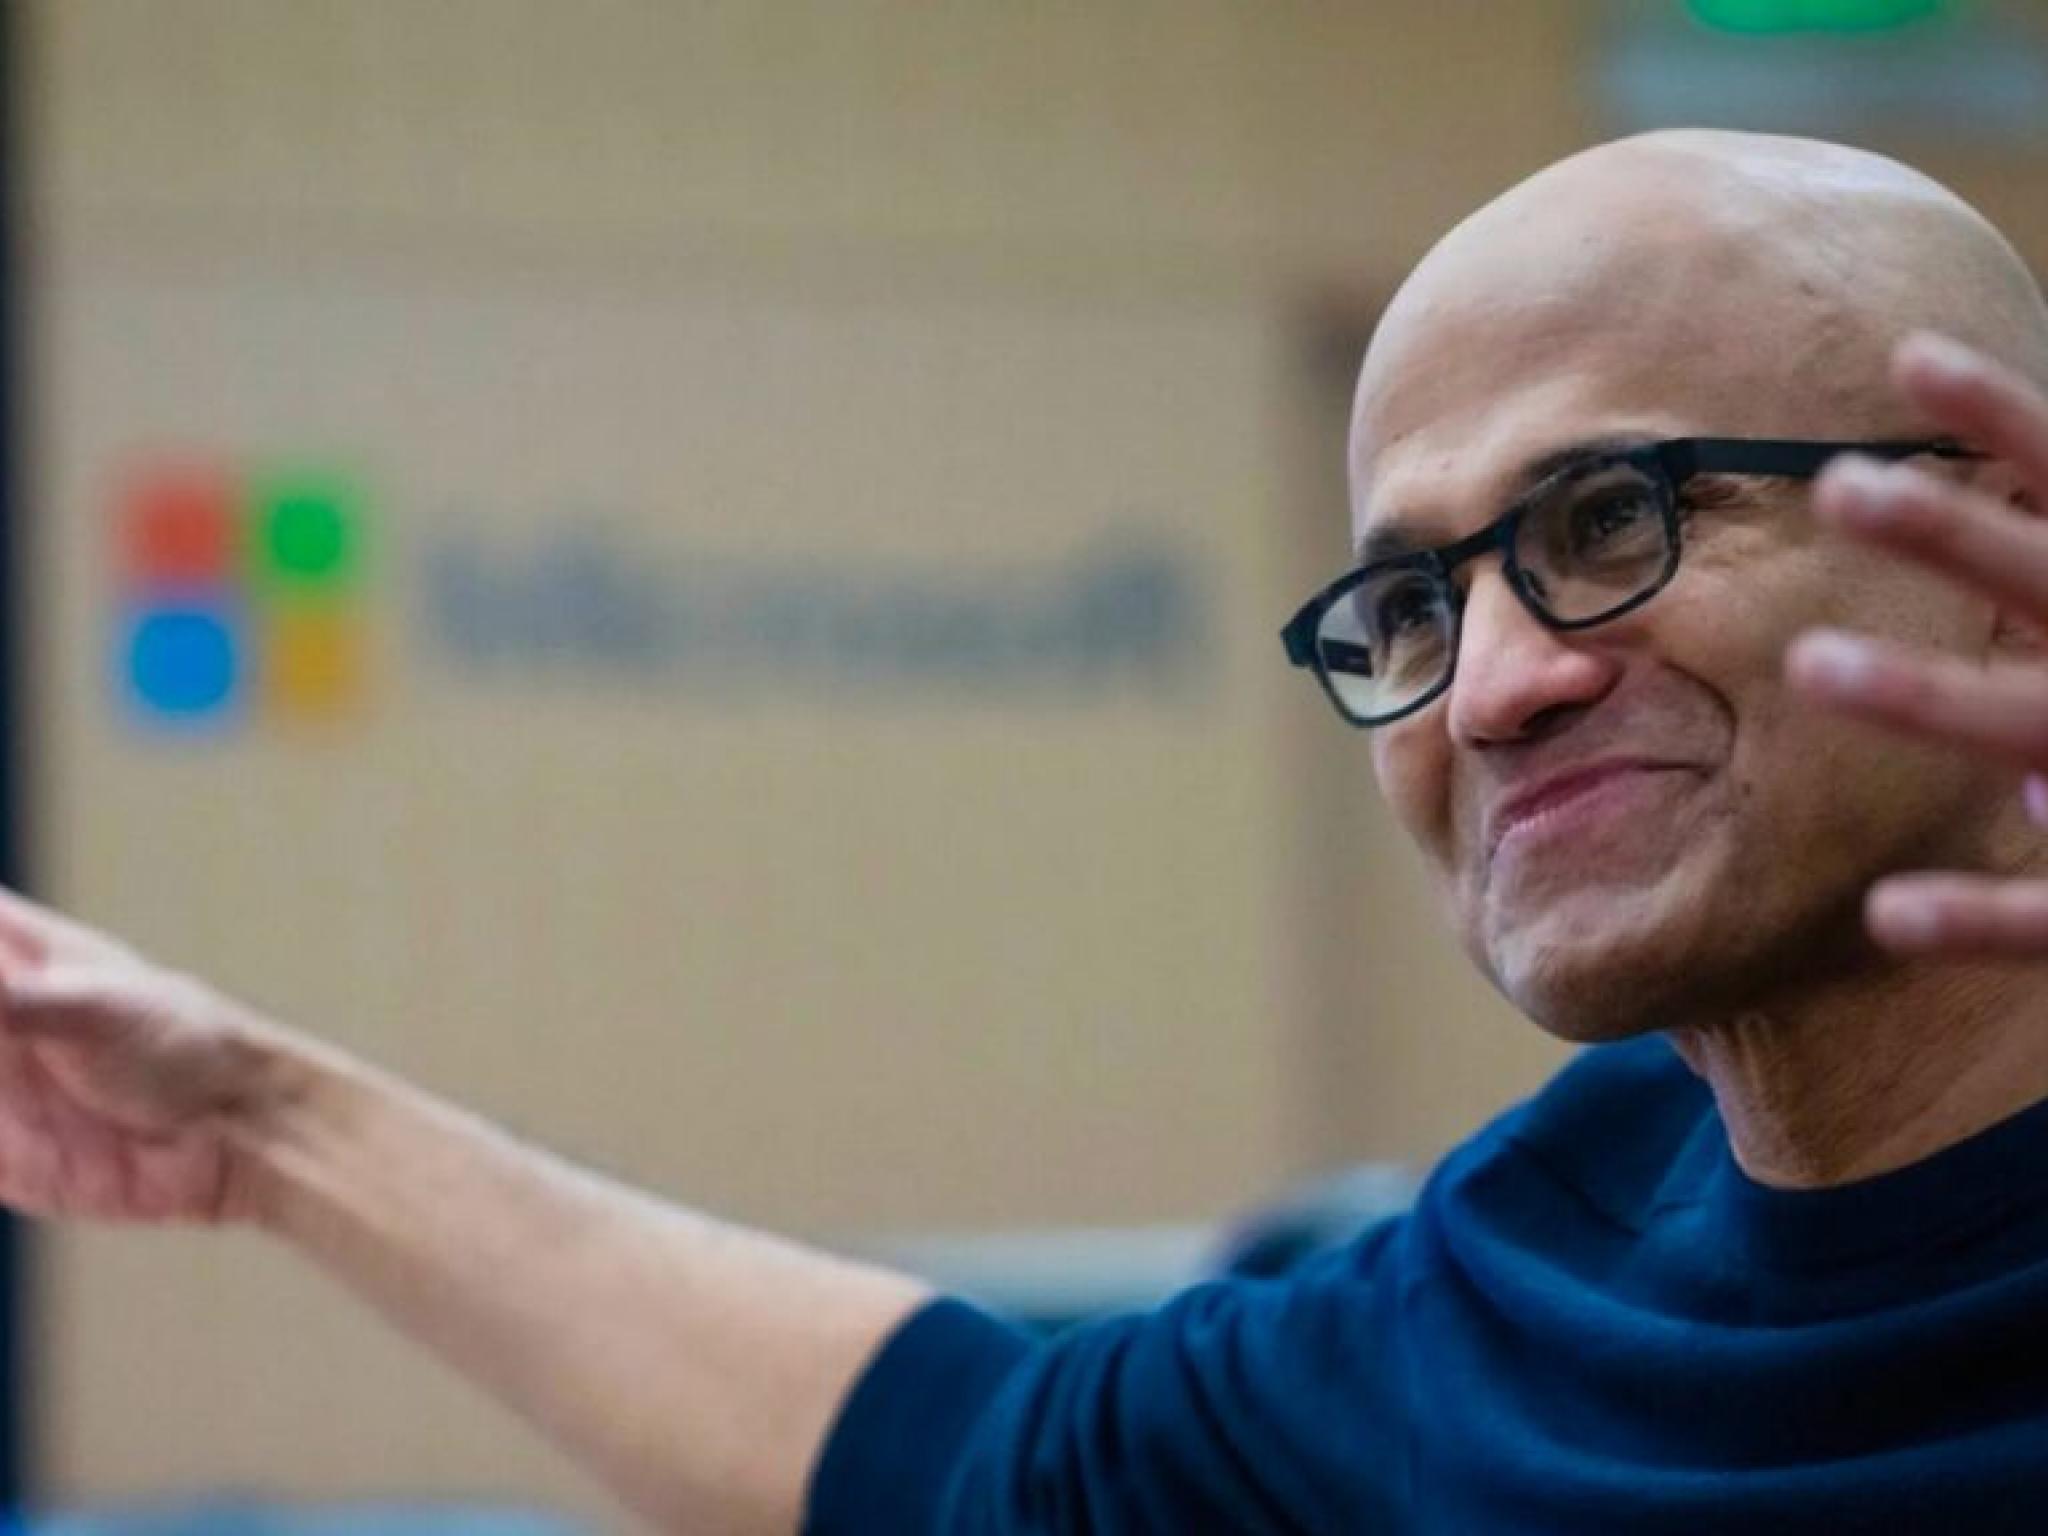  another-picasso-like-performance-top-tech-analyst-praises-satya-nadella-says-microsoft-is-top-ai-draft-pick-with-20-rally-in-store 